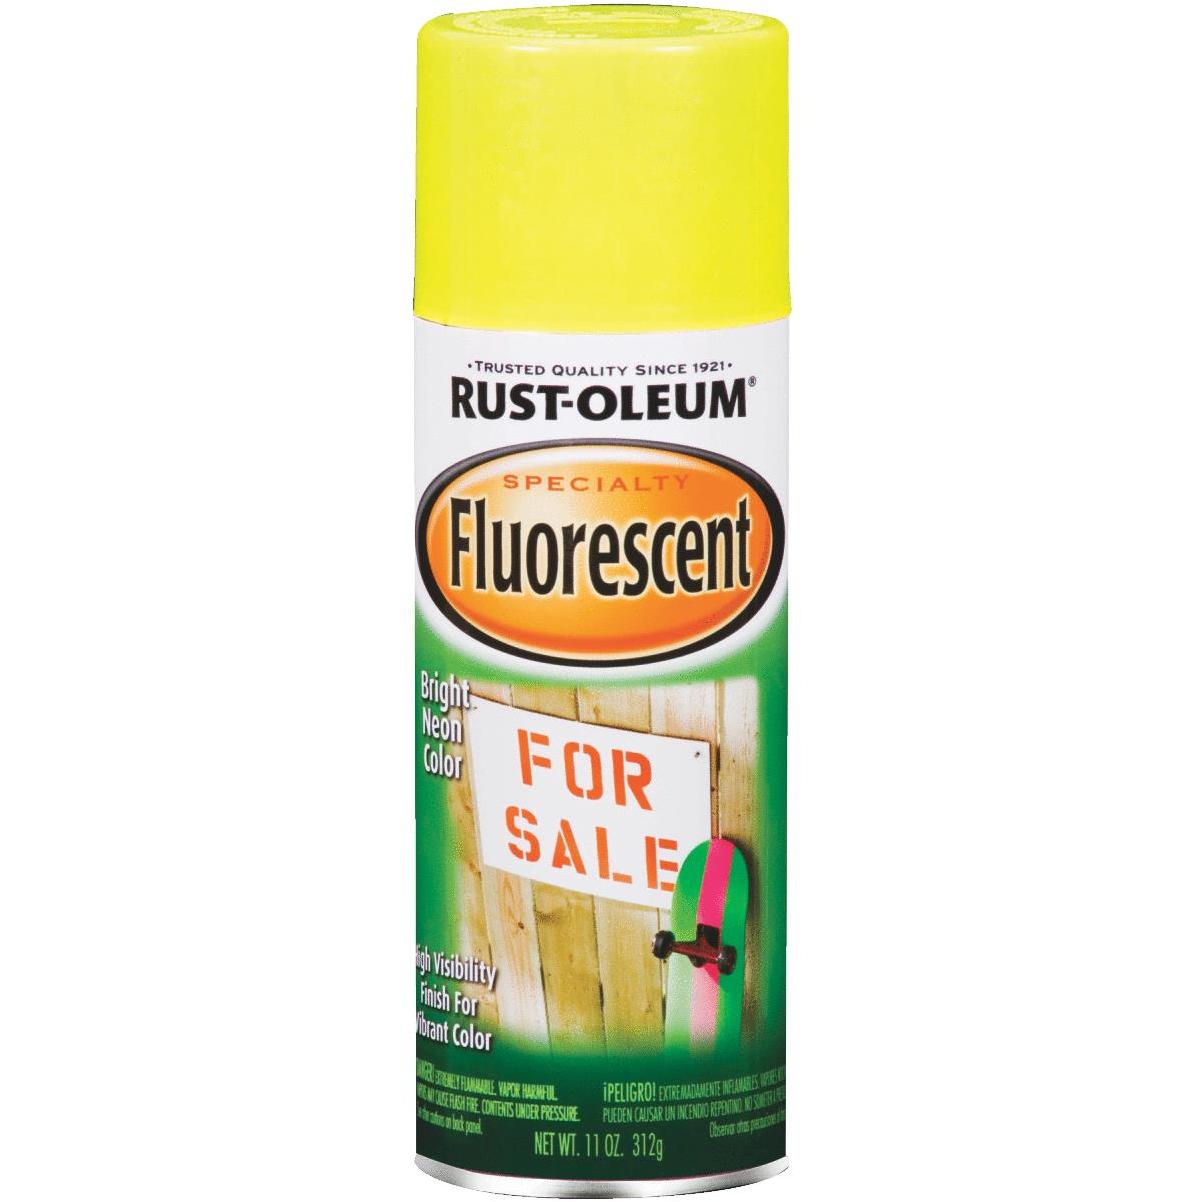 Rust-Oleum Camouflage 2X Ultra Cover 12 Oz. Flat Spray Paint